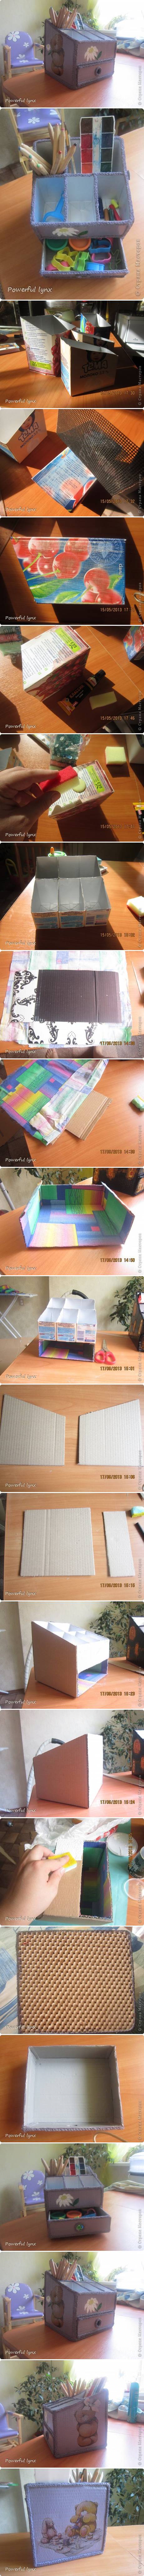 How-to-make-Beautiful-Desk-Organizer-step-by-step-DIY-instructions